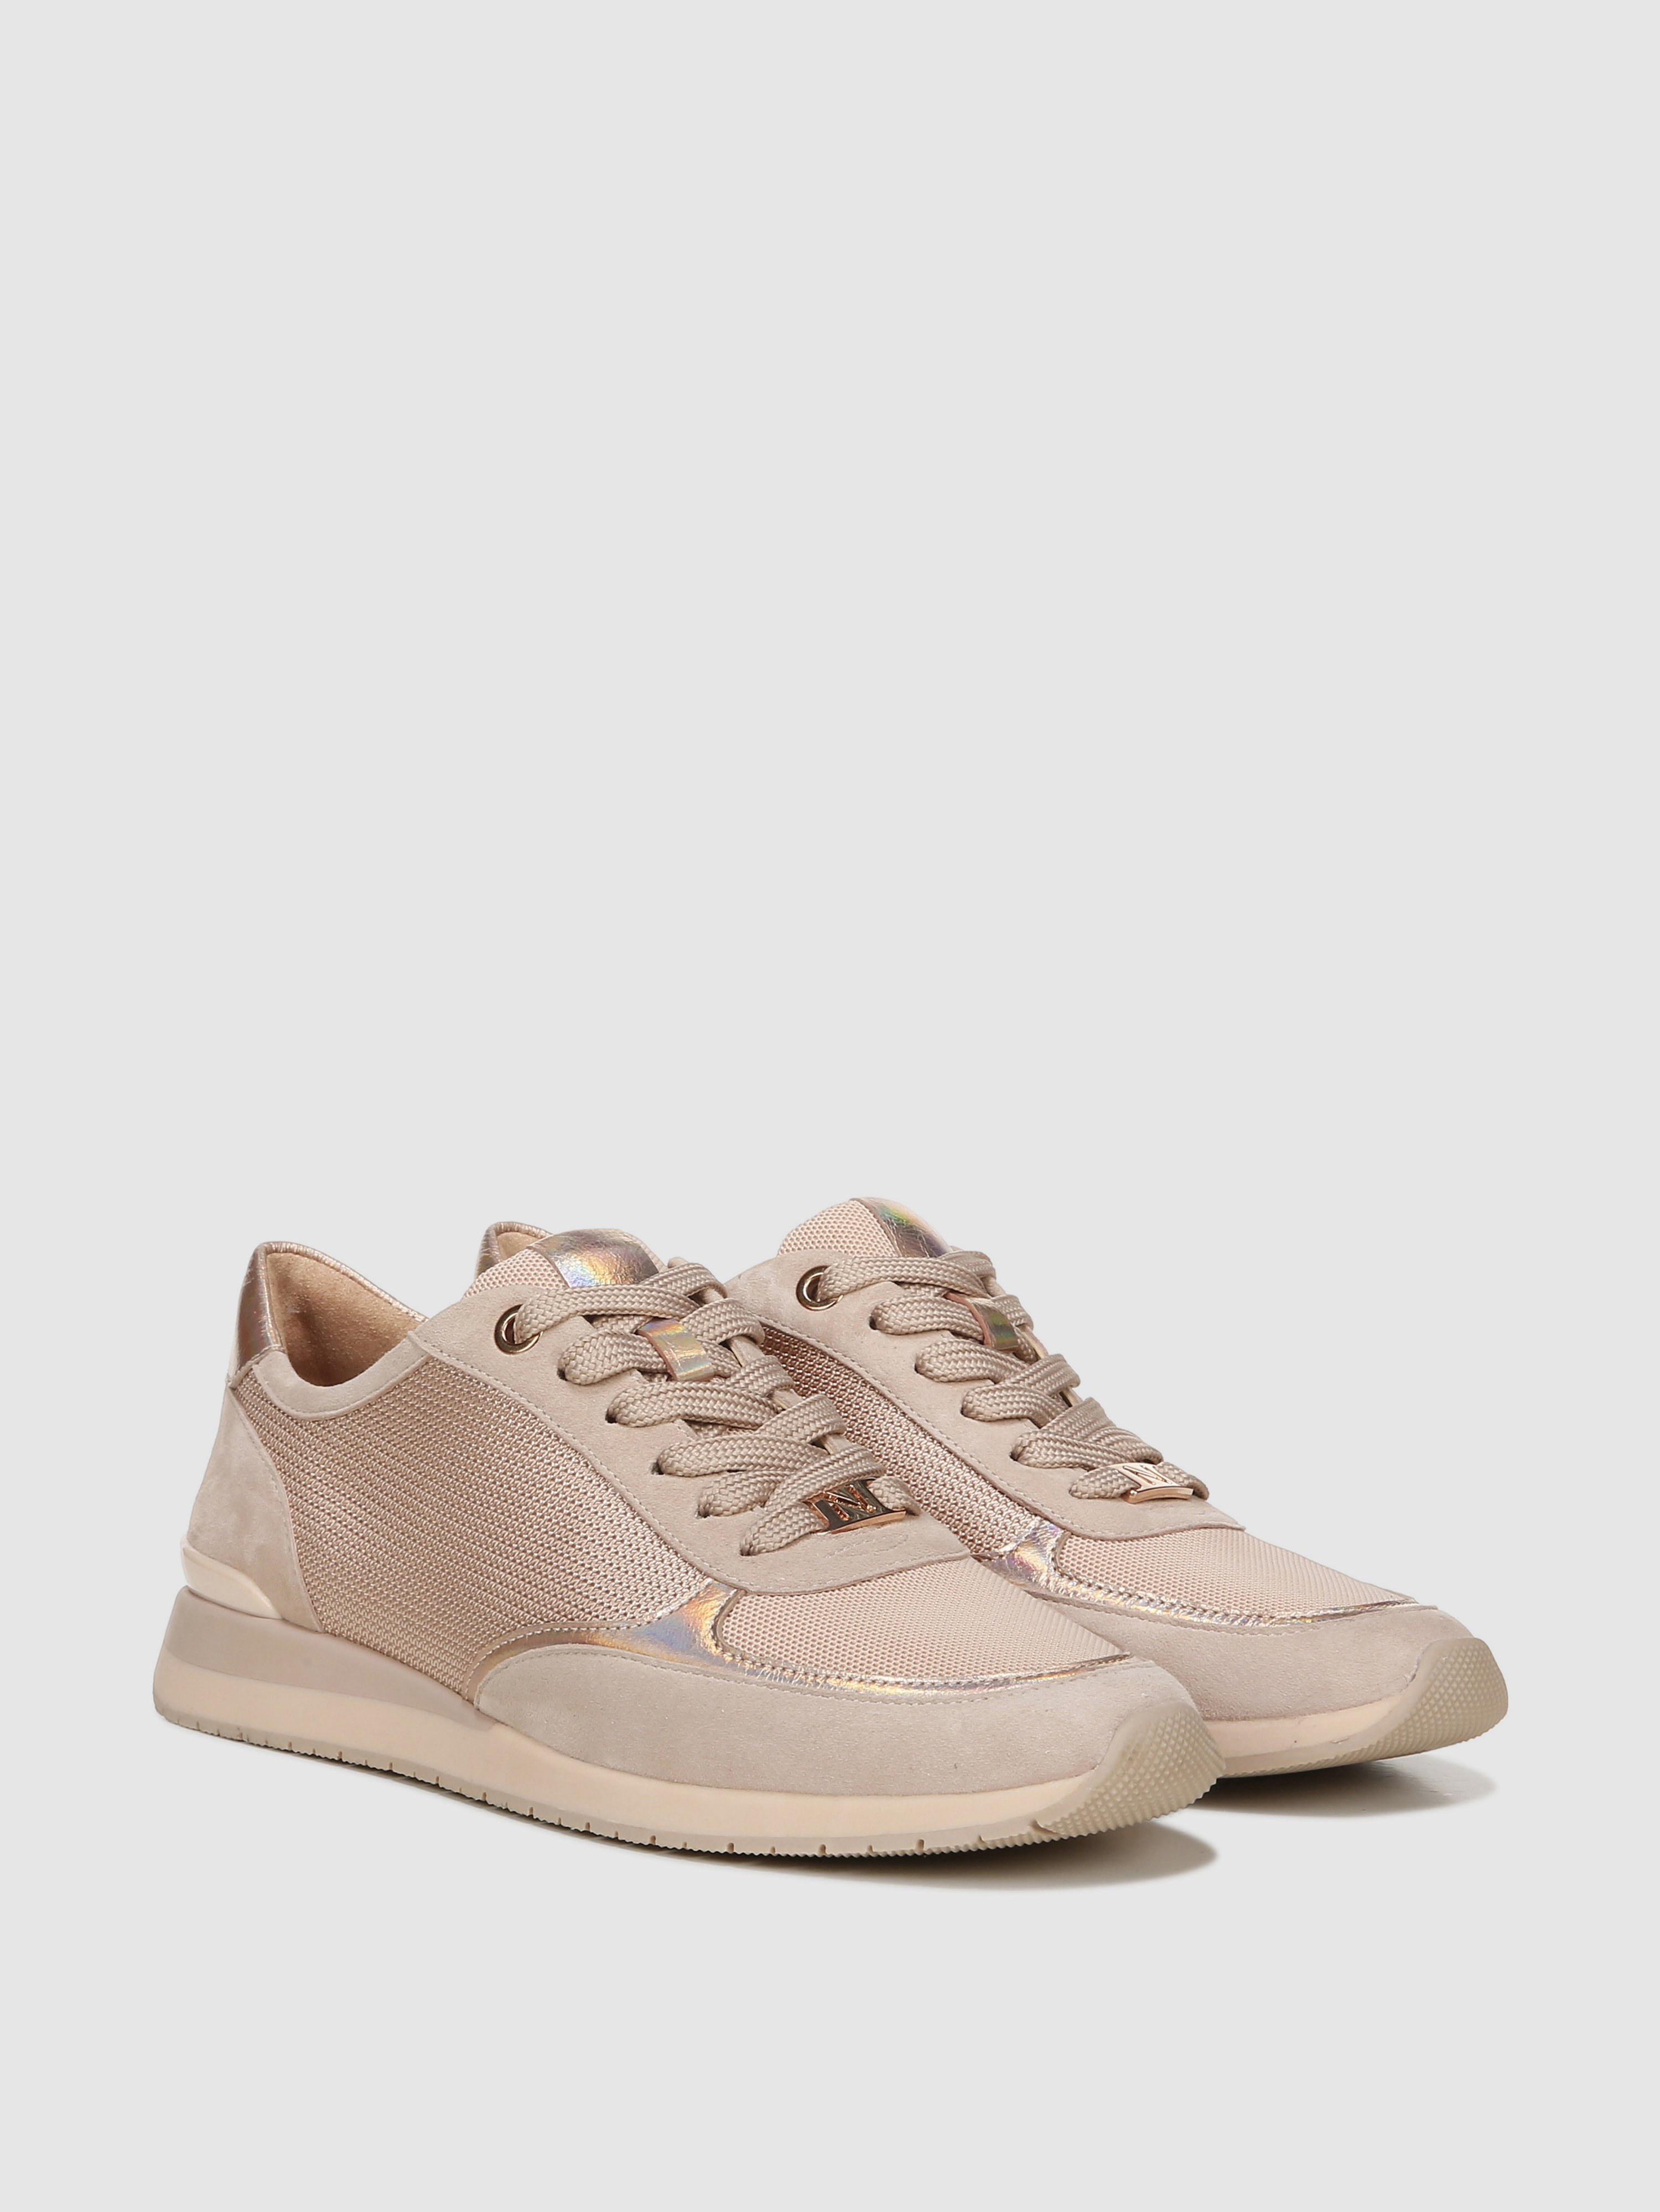 Naturalizer Lotus Lace Up Sport Sneaker In Almond